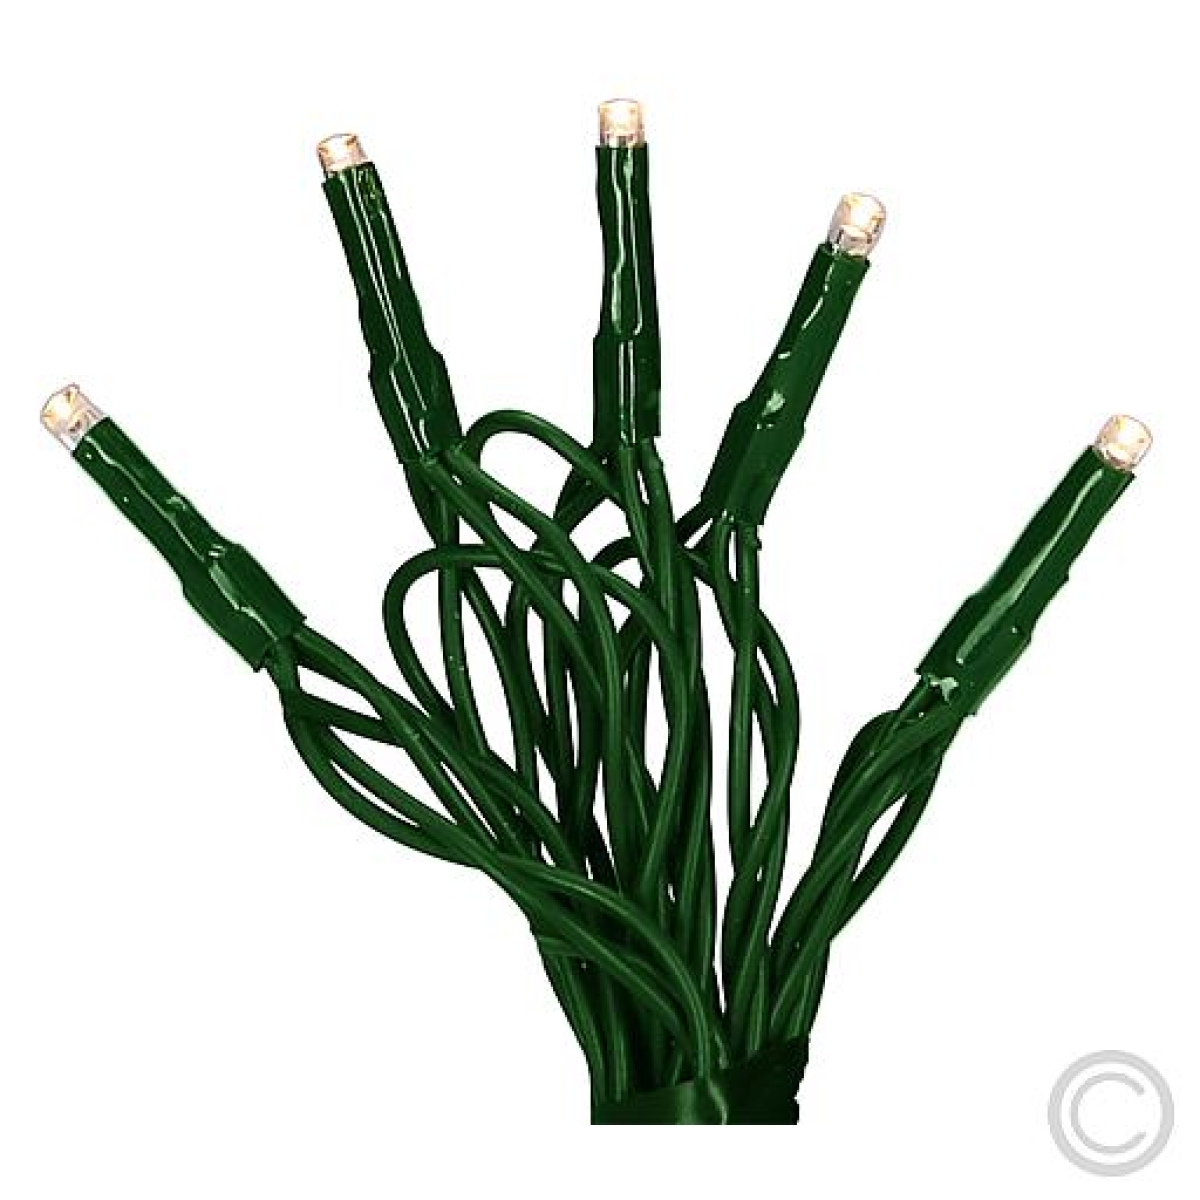 KonstsmideMicro LED light chain 200 flg. ww, green cable 6355-120Article-No: 831035